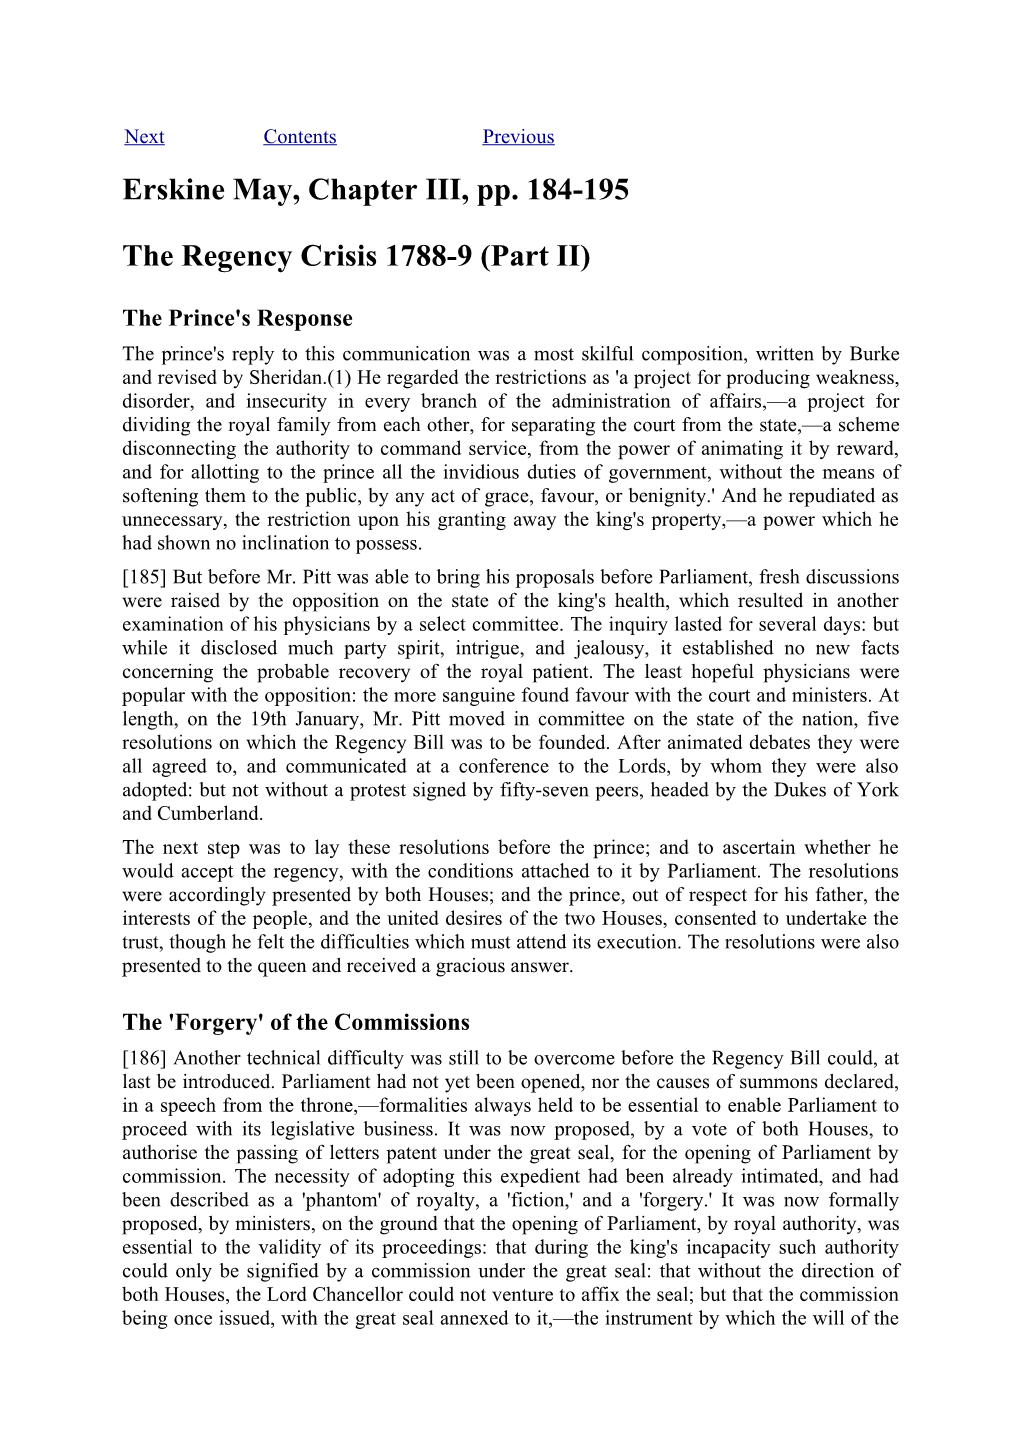 Erskine May, Chapter III, Pp. 184-195 the Regency Crisis 1788-9 (Part